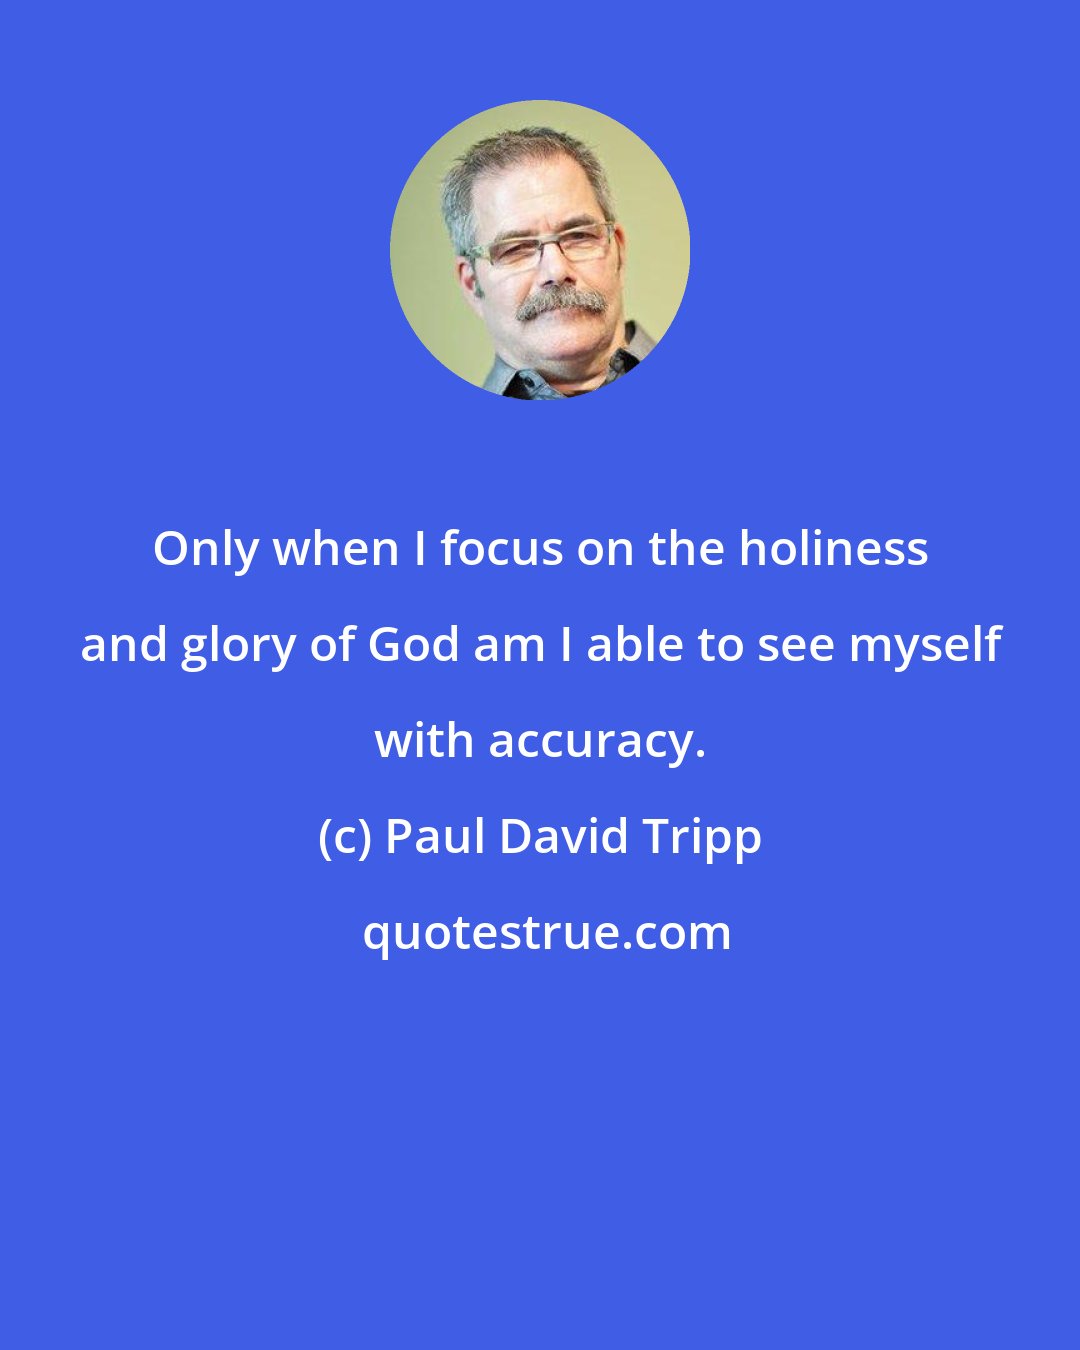 Paul David Tripp: Only when I focus on the holiness and glory of God am I able to see myself with accuracy.